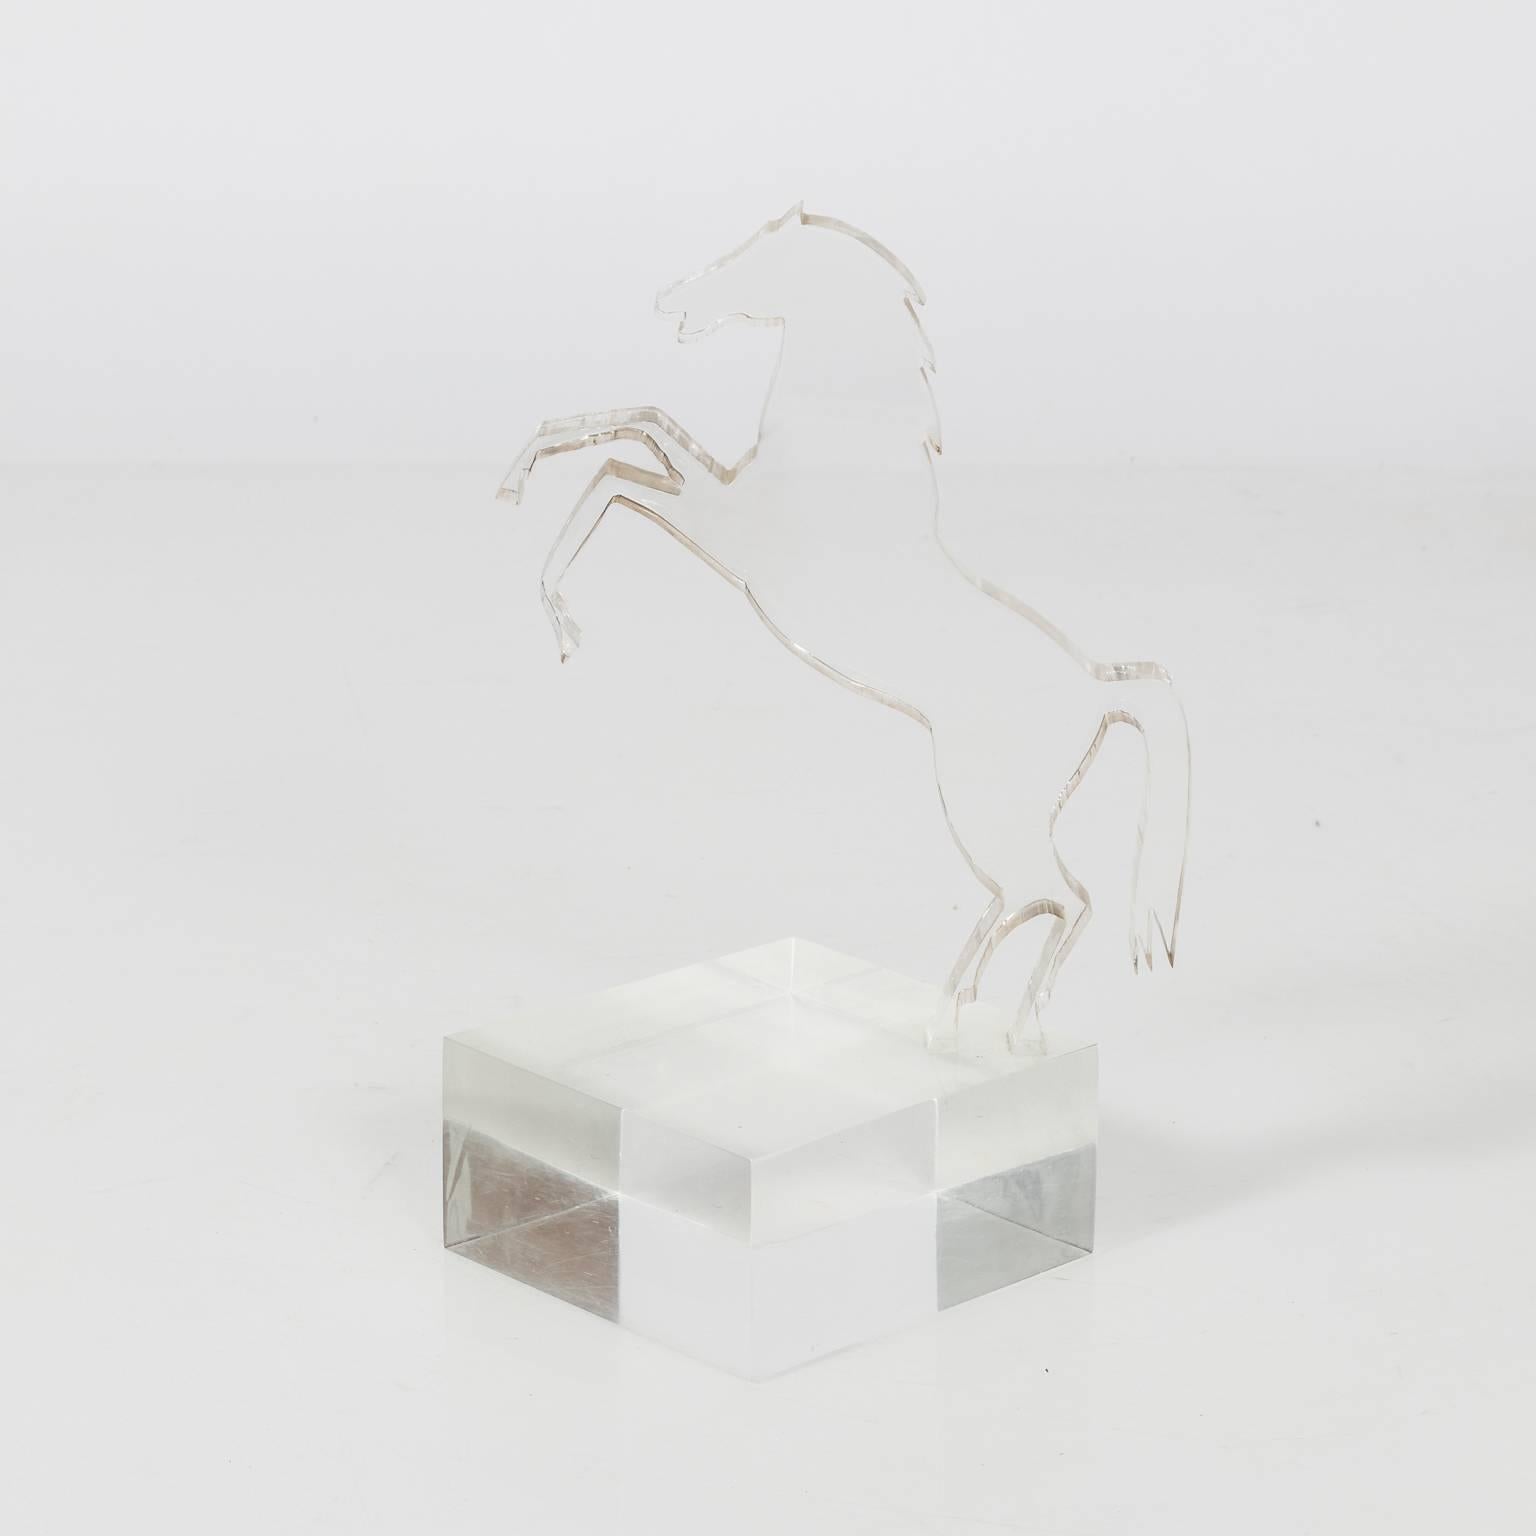 Italian Lucite sculpture depicting the silhouette of a horse on a Lucite base, circa 1970.
     